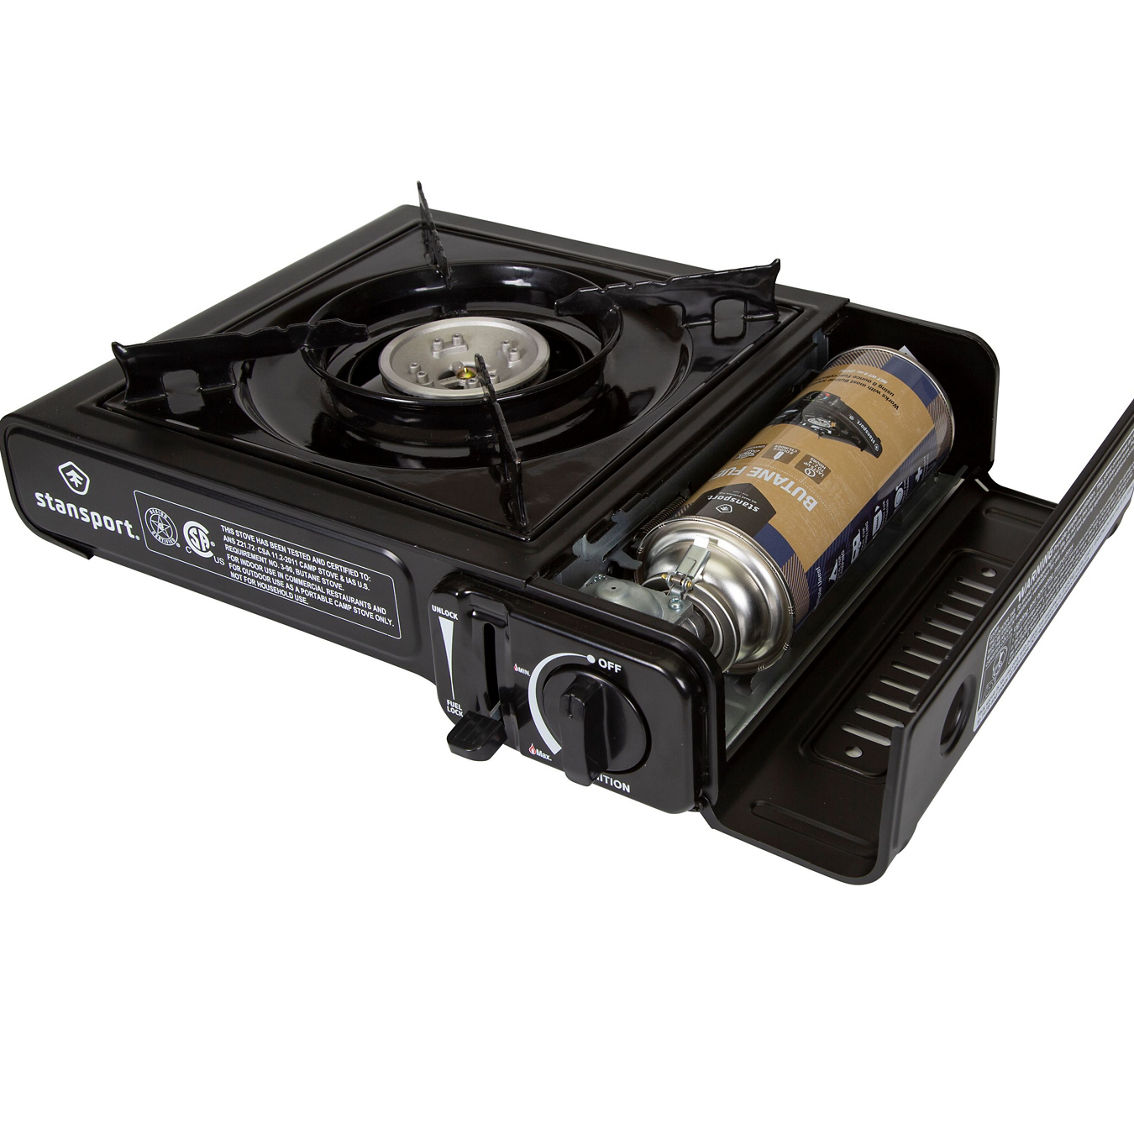 Stansport Portable Outdoor Butane Stove - Image 3 of 4